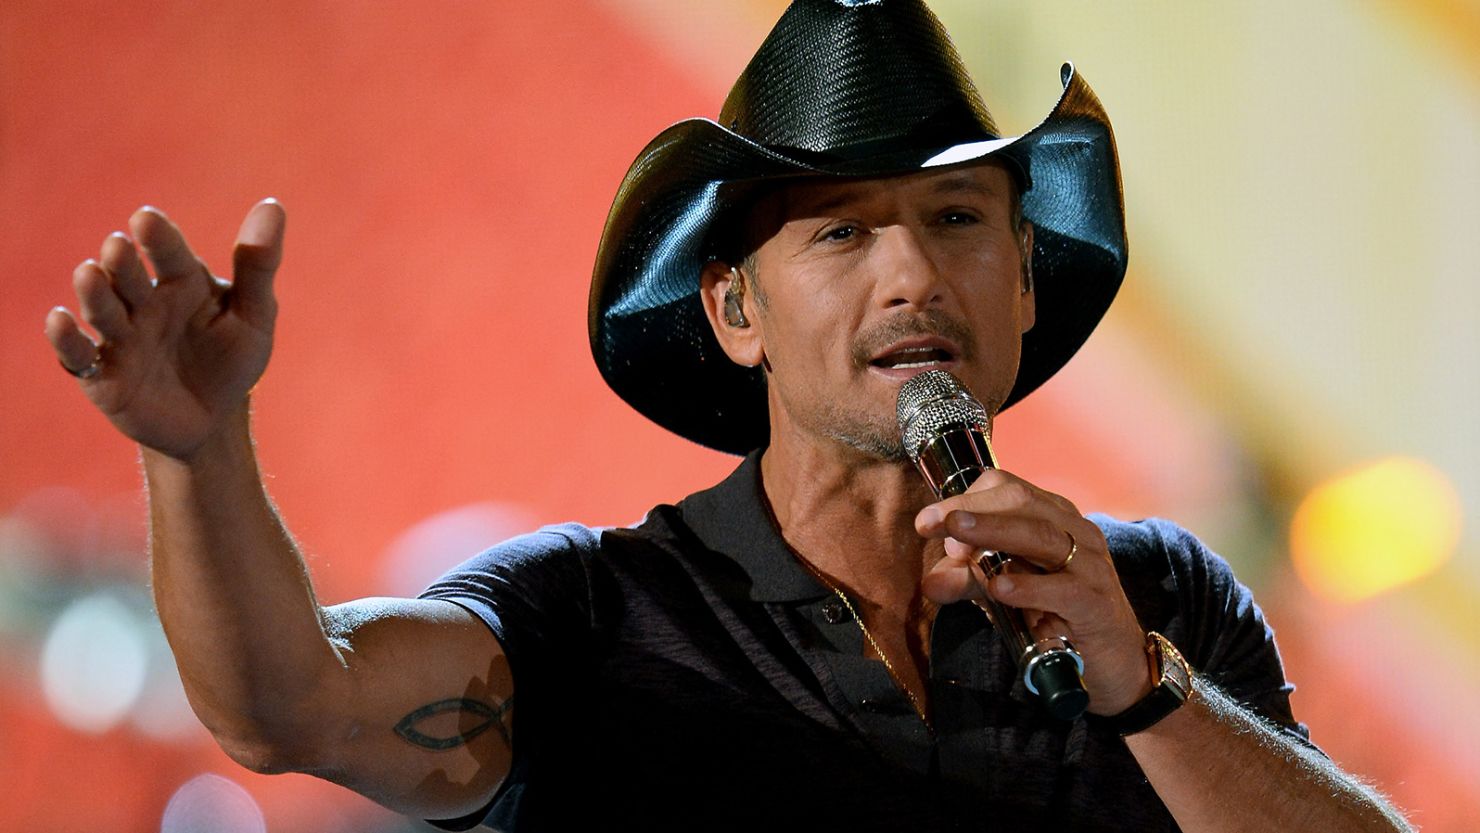 Tim McGraw performs during ACM Presents: An All-Star Salute To The Troops at the MGM Grand Garden Arena on April 7, 2014 in Las Vegas, Nevada.